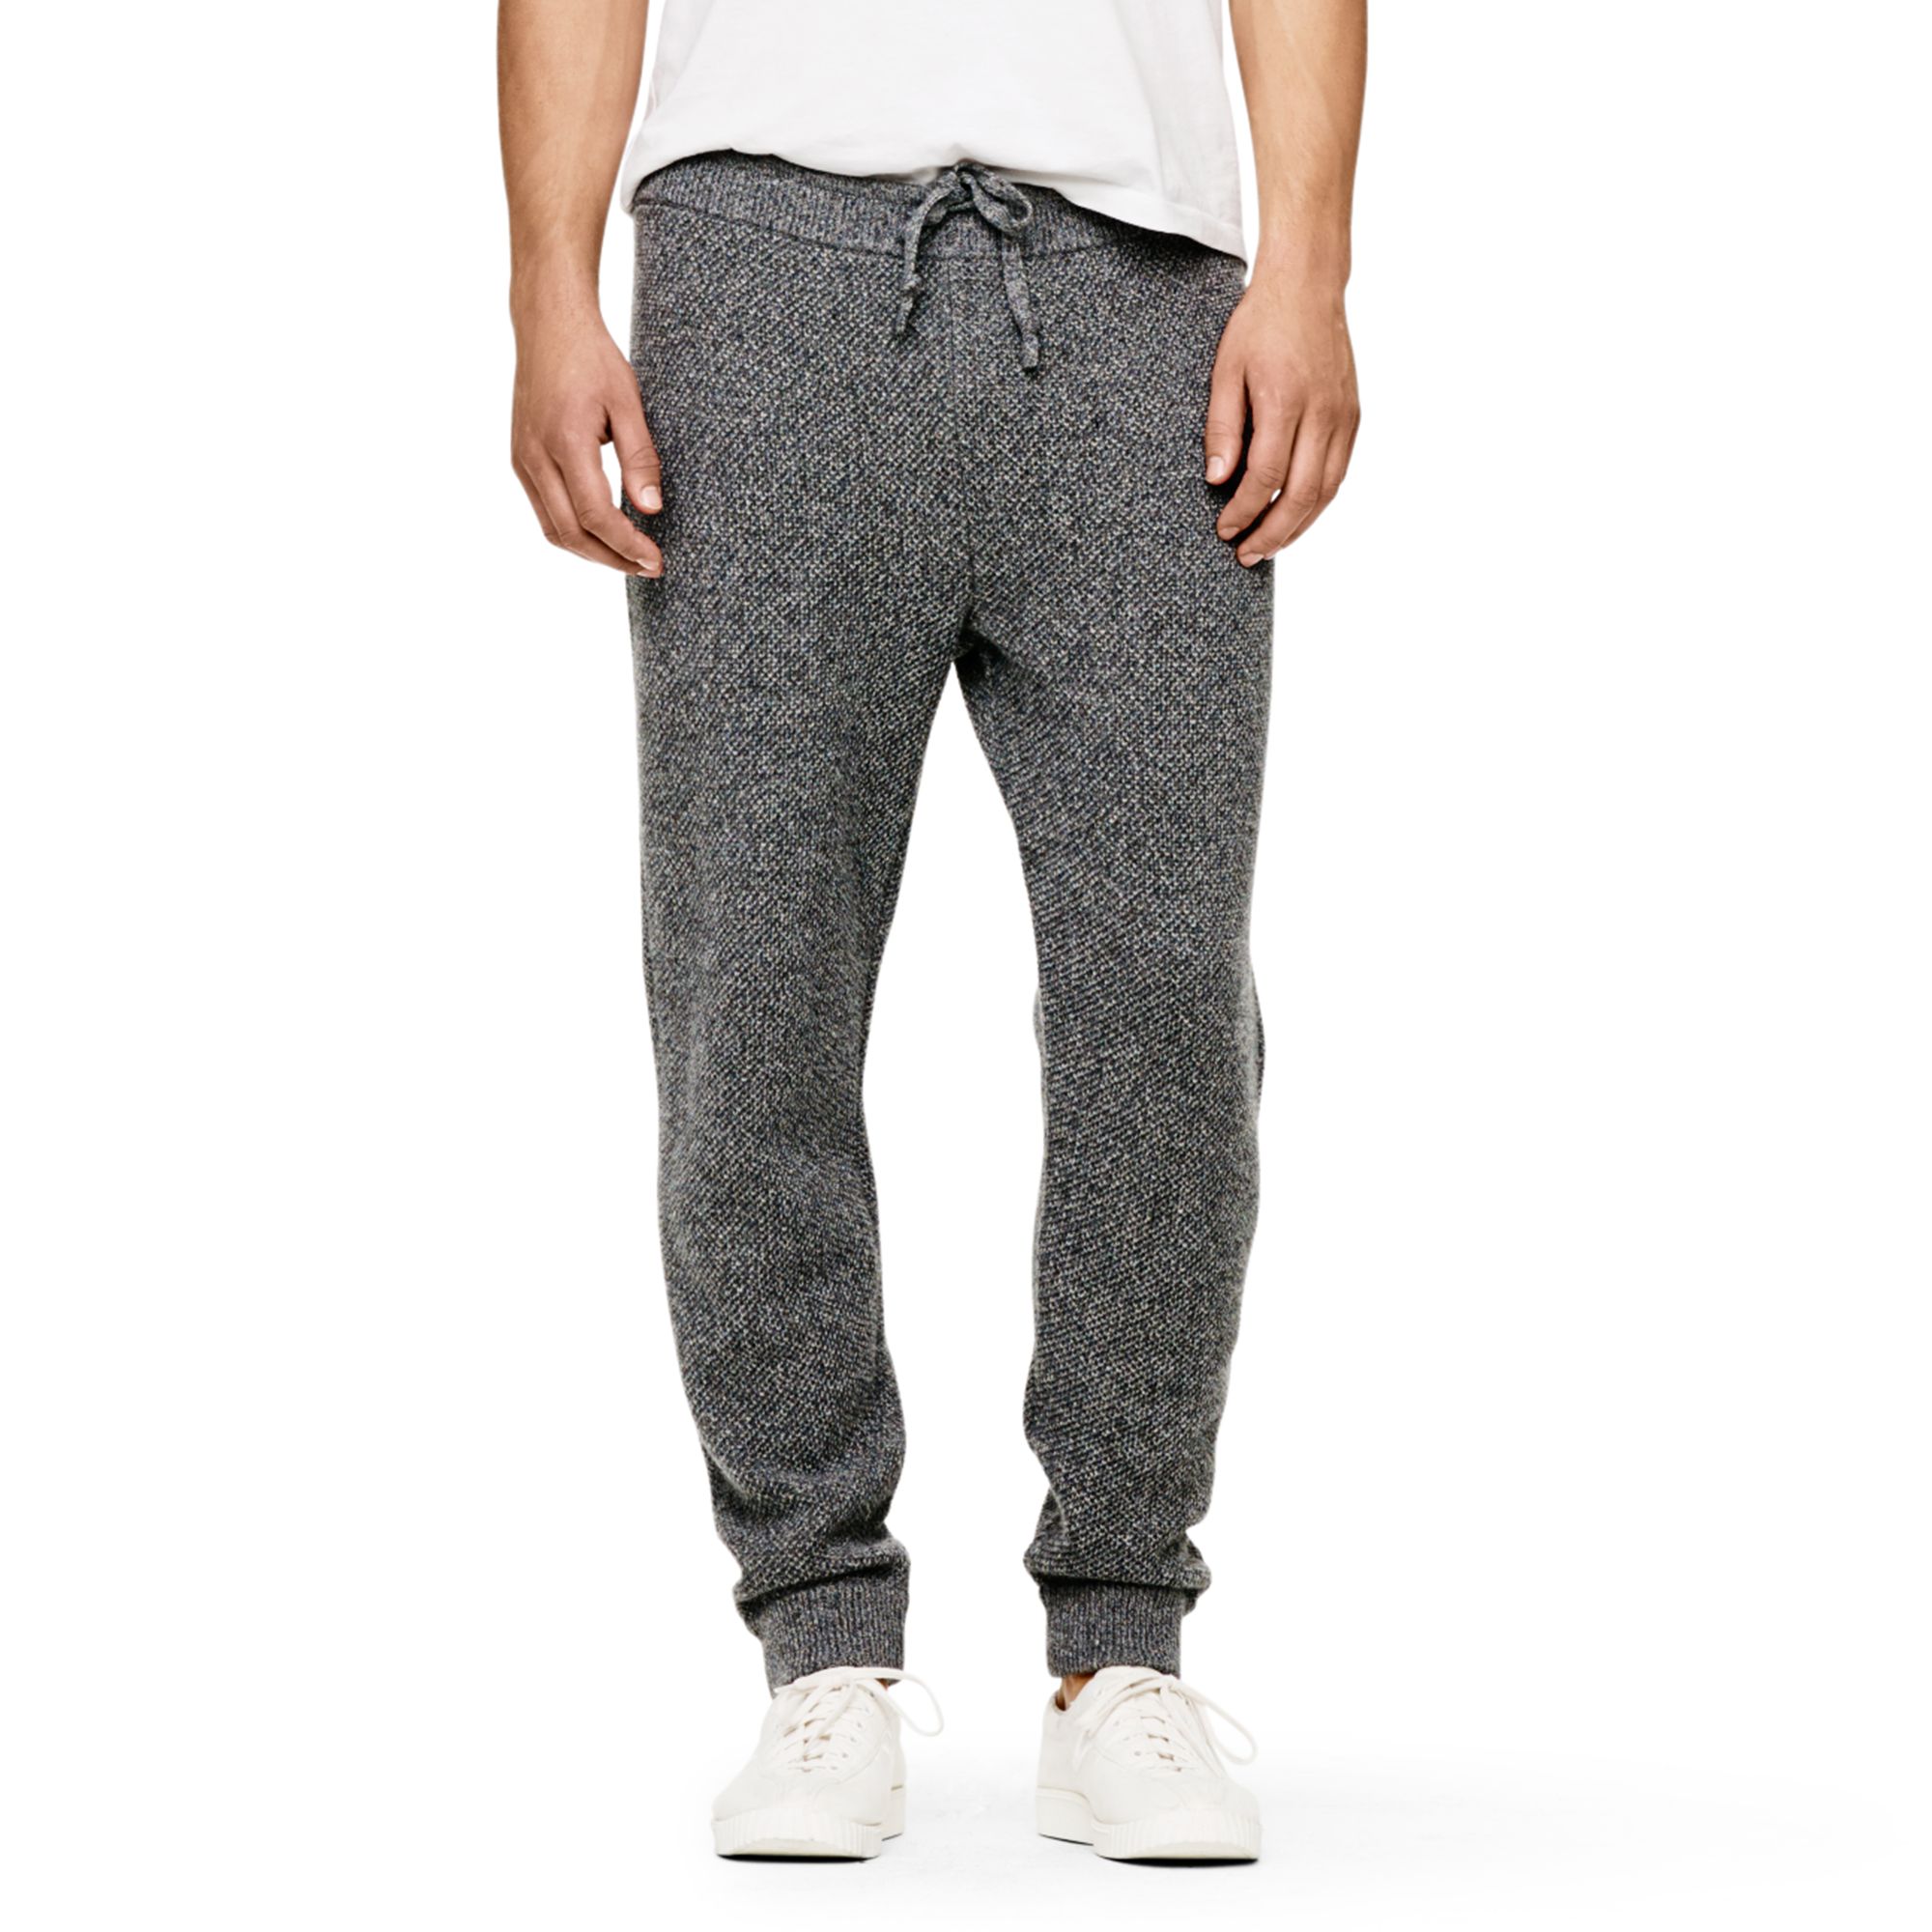 Lyst - Club monaco Cashmere Waffle Pant in Gray for Men